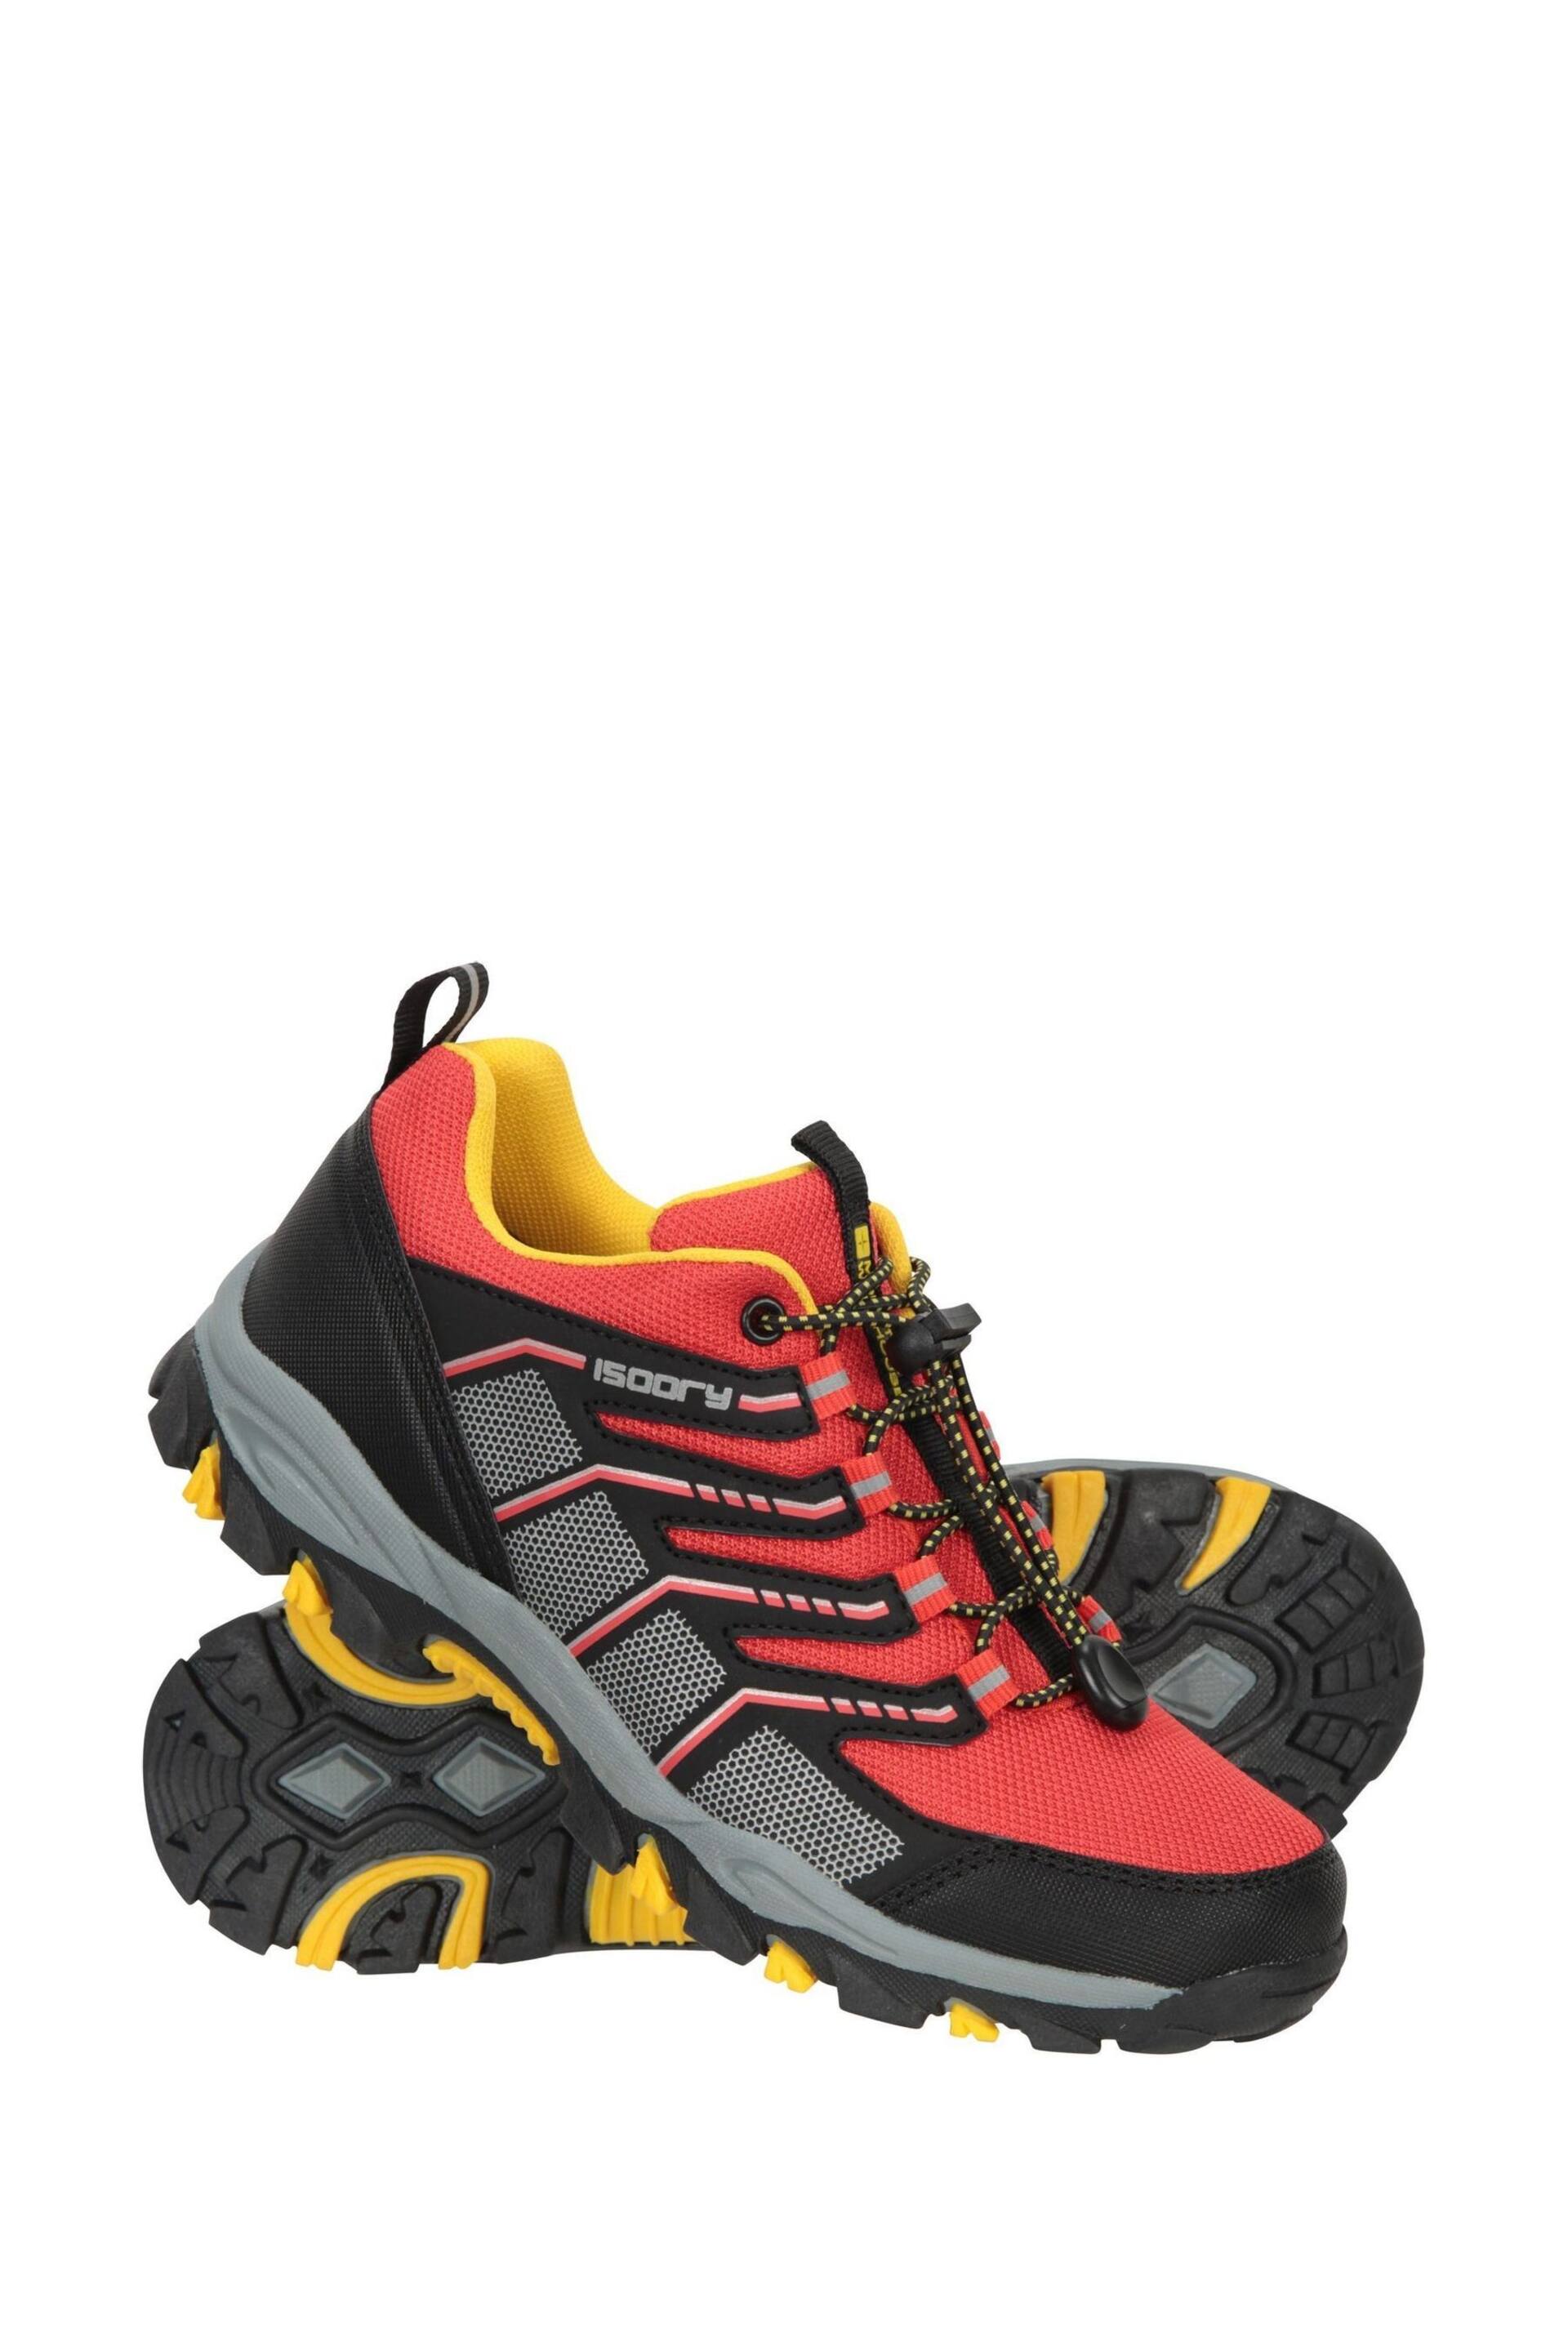 Mountain Warehouse Red Kids Bolt Active Waterproof Shoes - Image 1 of 6